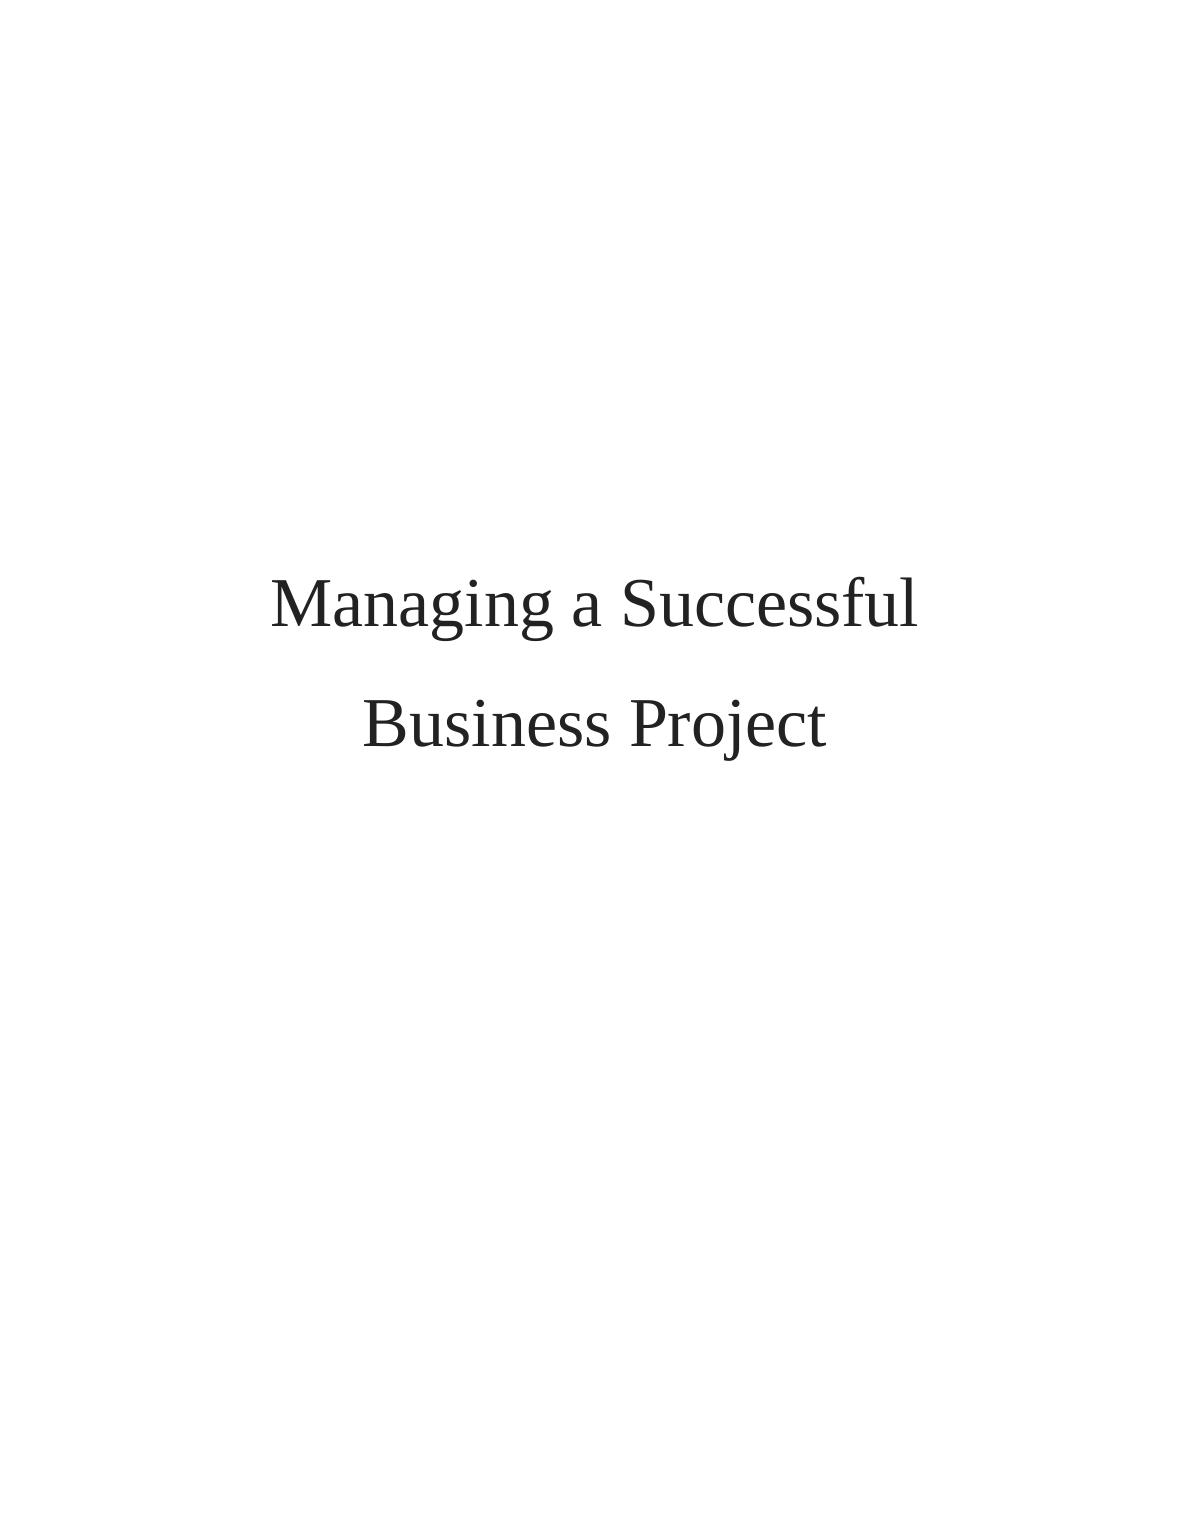 Managing a Successful Business Project Contents_1